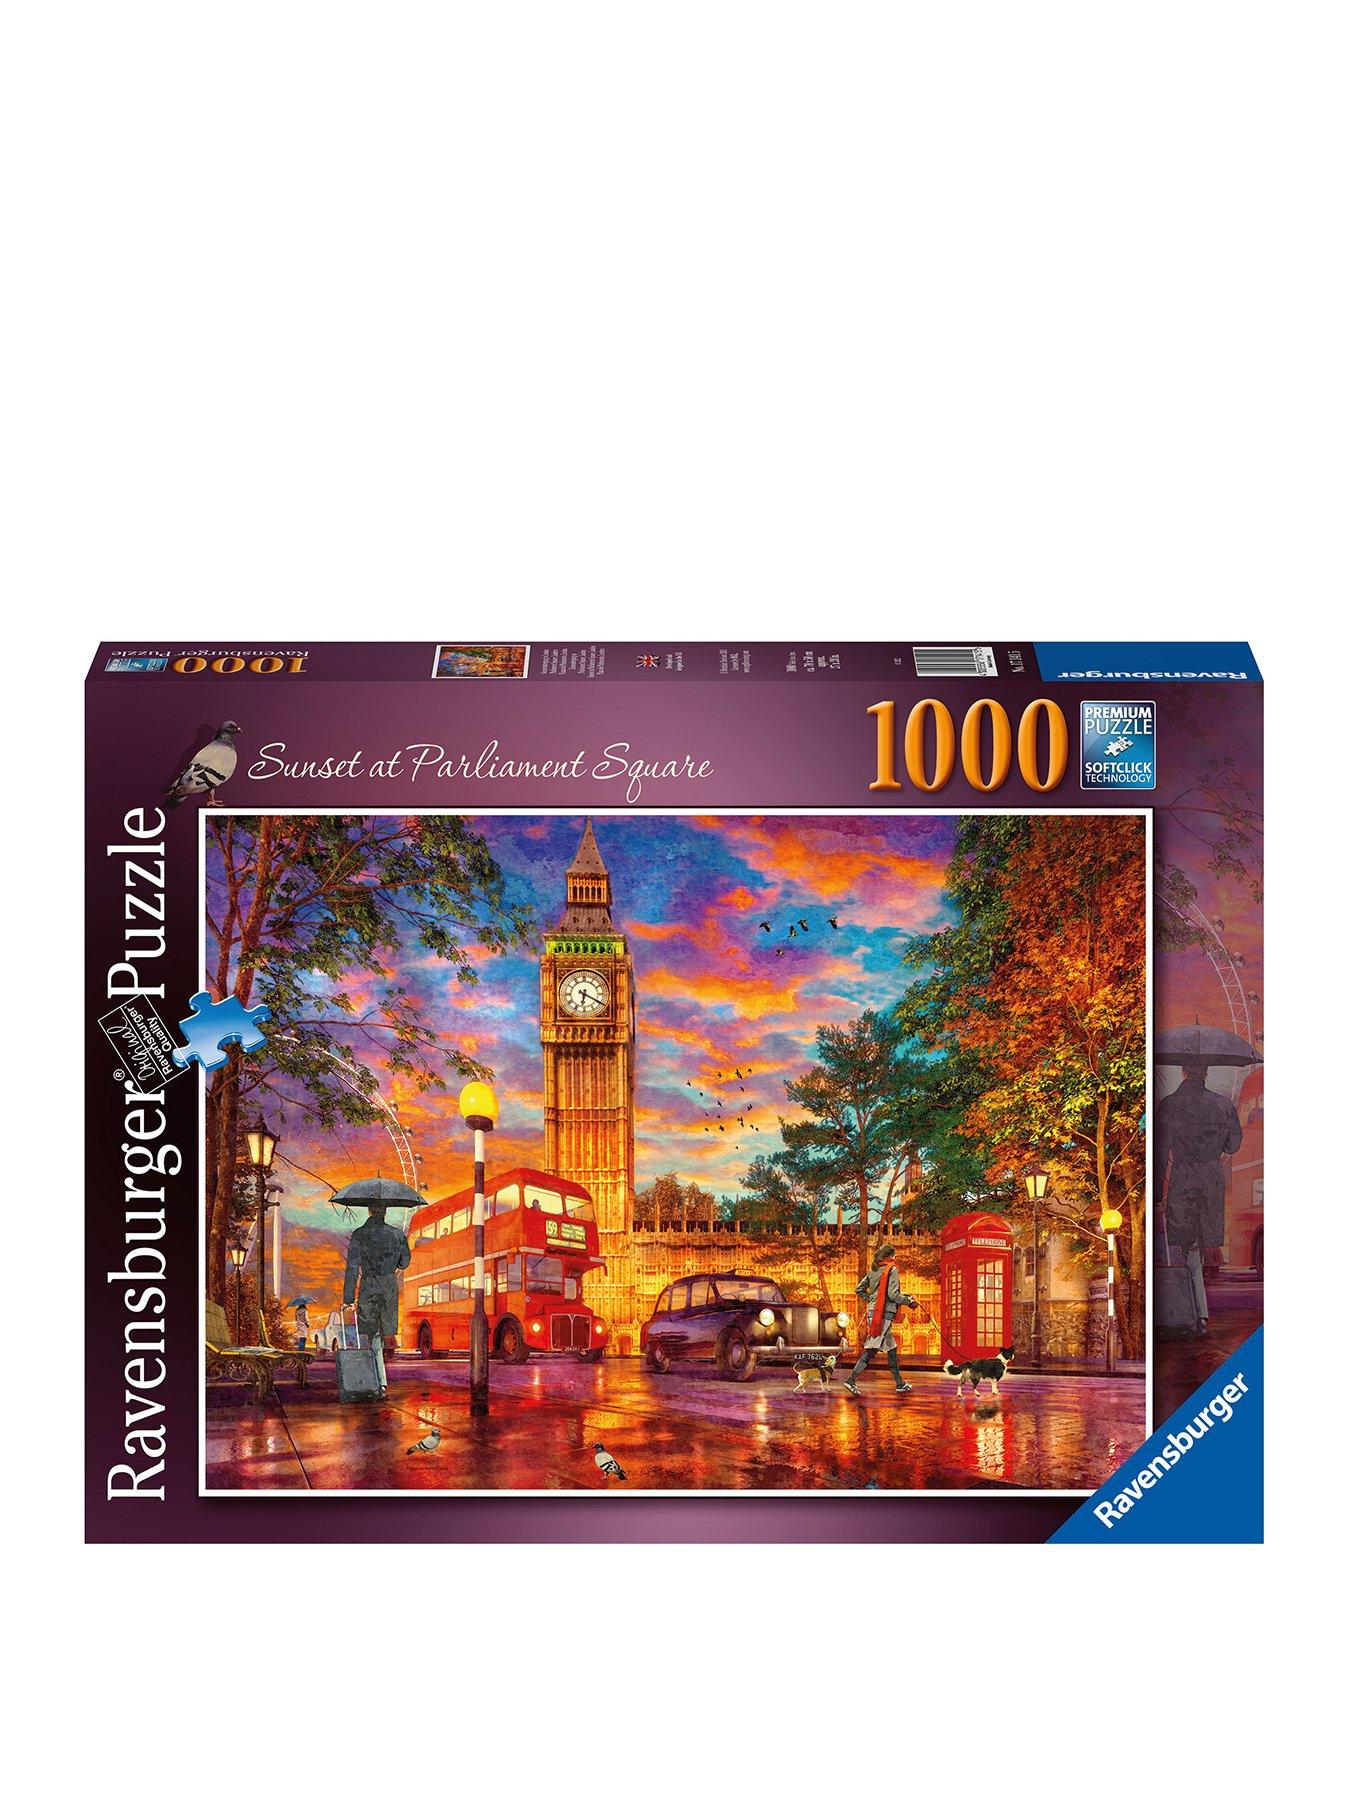 Details about   Ravensburger The Best Disney Themes 1000 Piece Jigsaw Puzzle Mural 